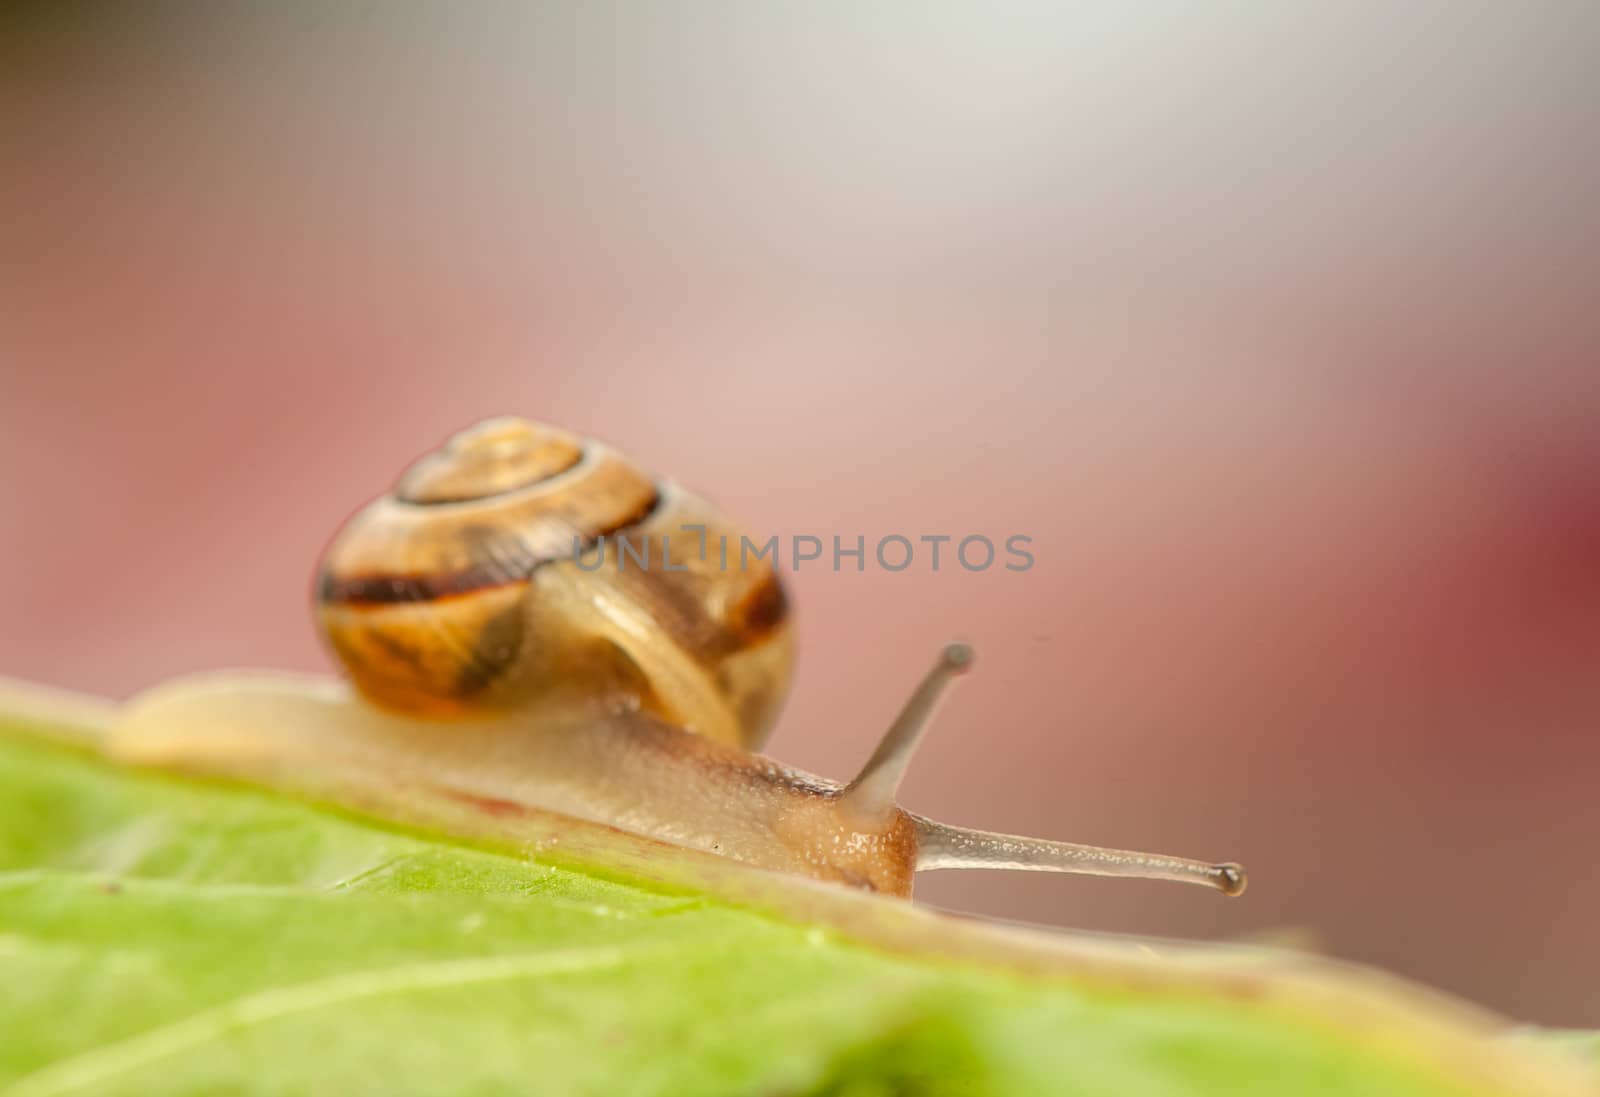 Snail by Gucio_55